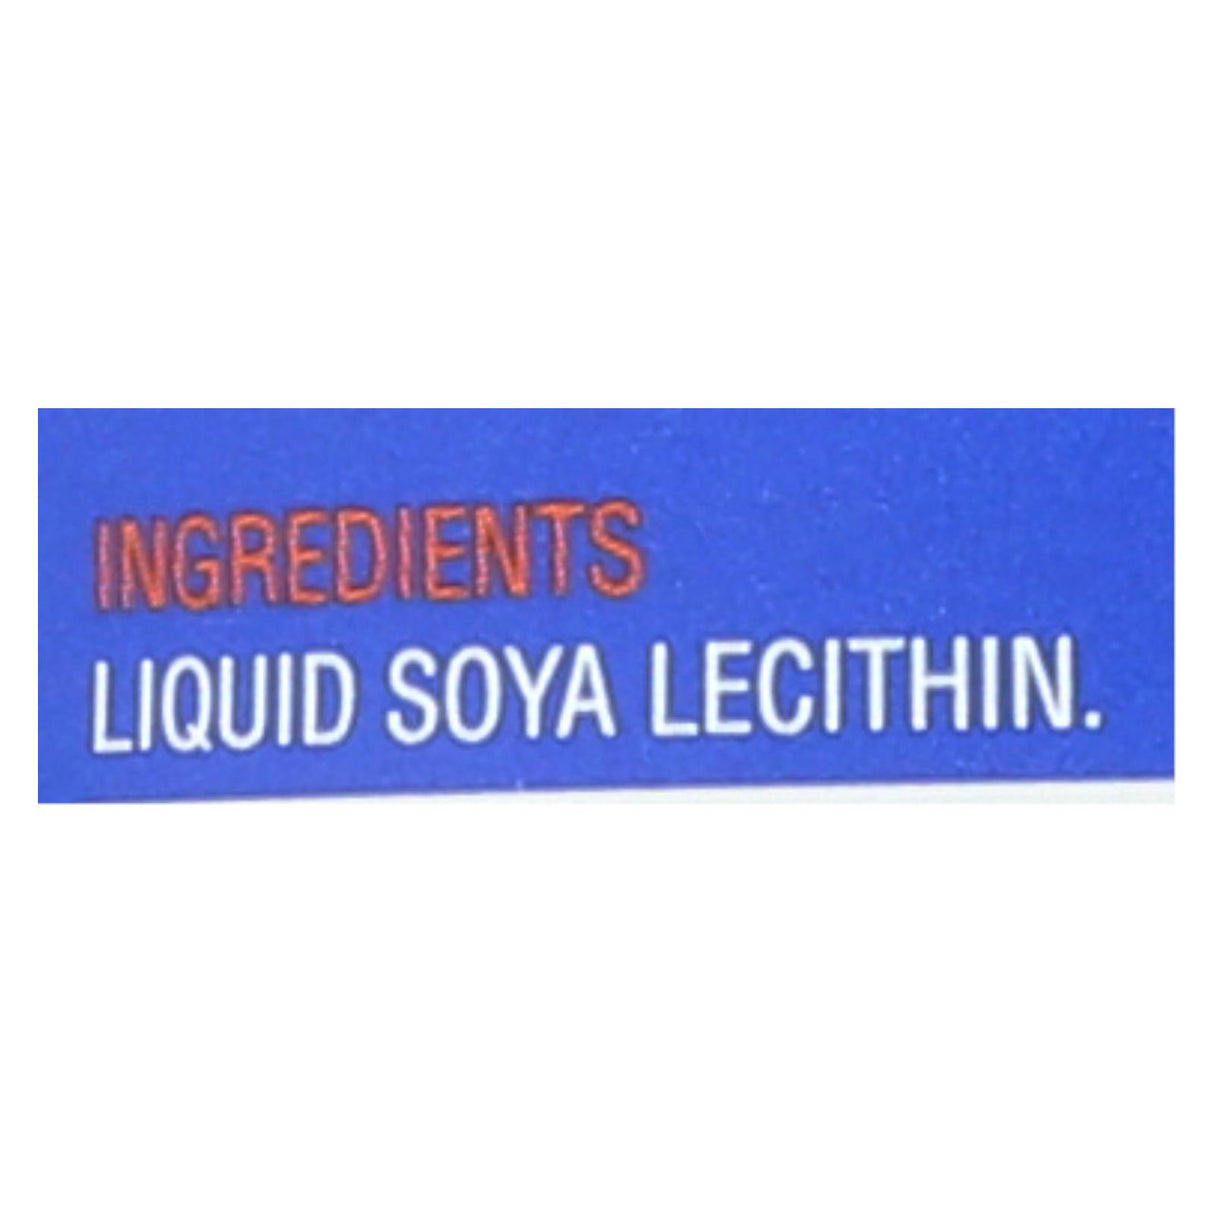 Fearn Liquid Lecithin: 16 Fl Oz, Superior Nutrient Support, Case of 12 (Pack of 12) - Cozy Farm 